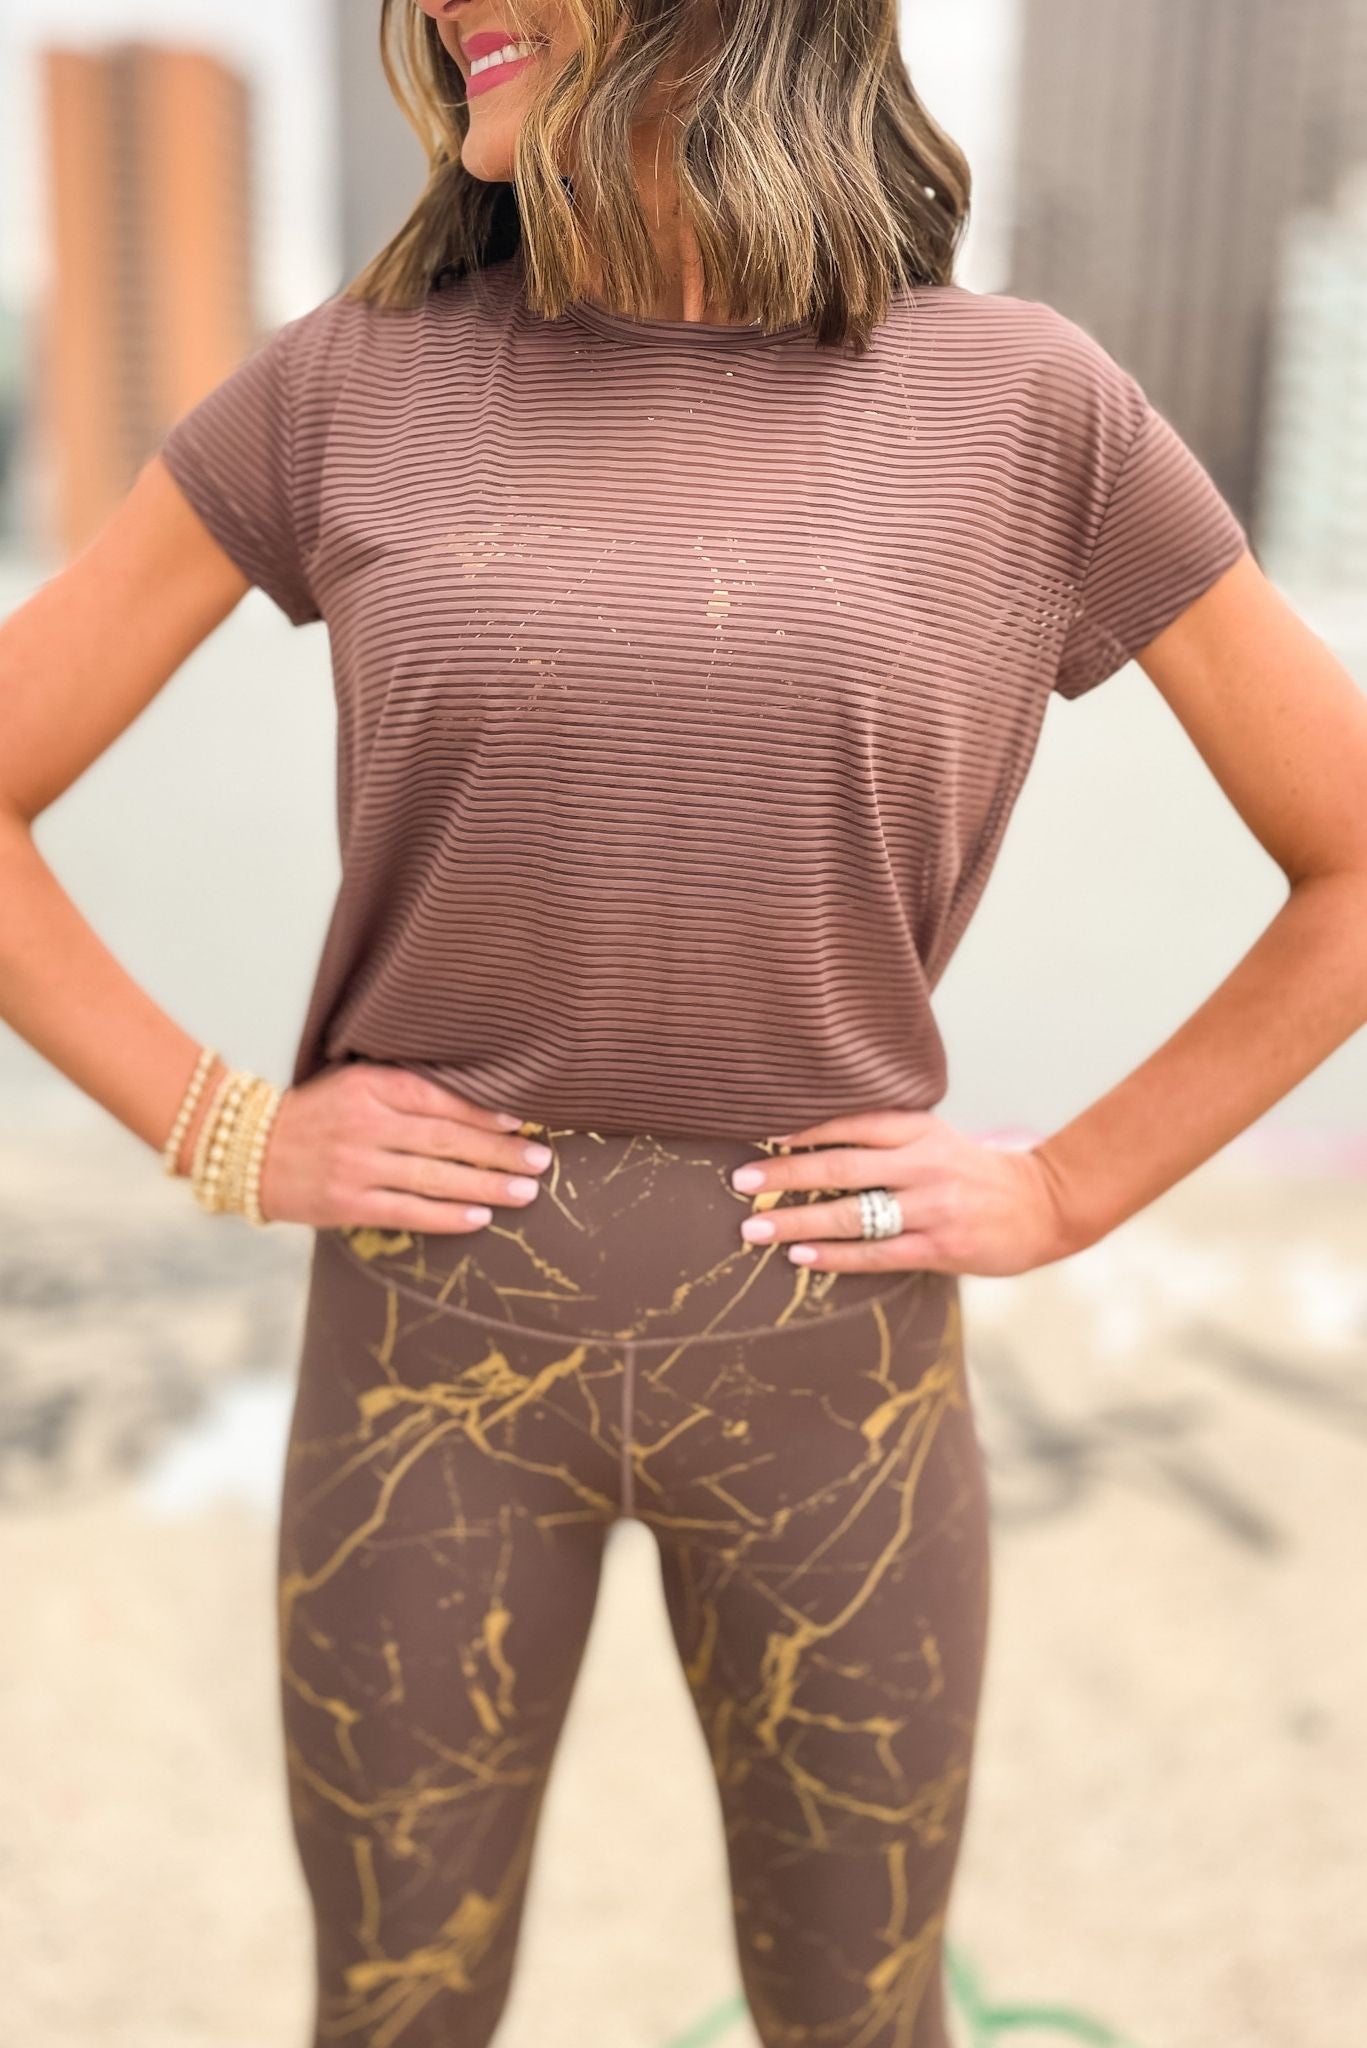 Cocoa Sheer Striped Athleisure Top w/ Back Panel, brown, work out top, athleisure, work out outfit, mom style, lounge wear, shop style your senses by mallory fitzsimmons